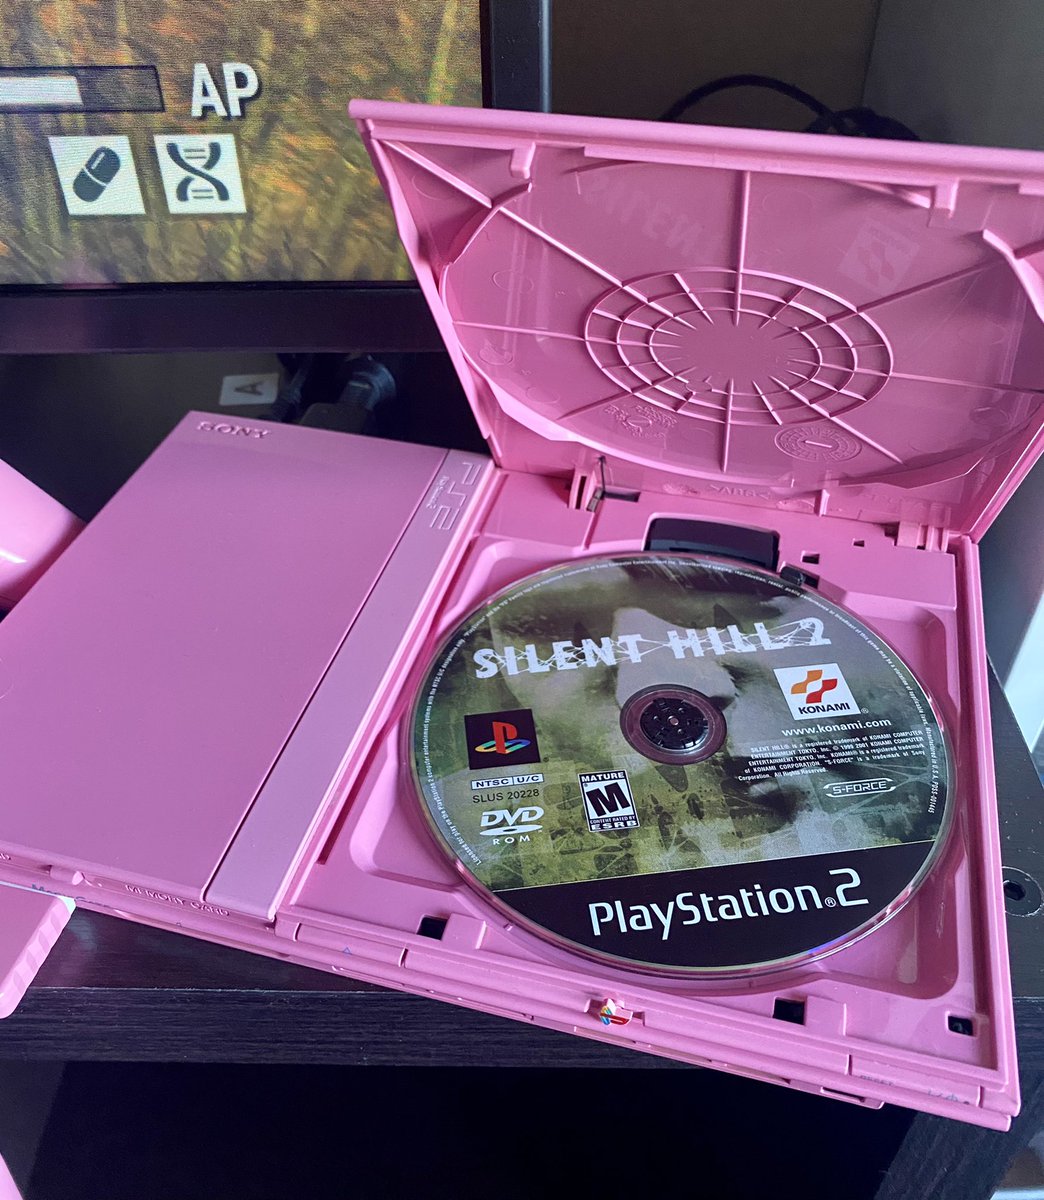 Silent Hill 2 in a pink PS2